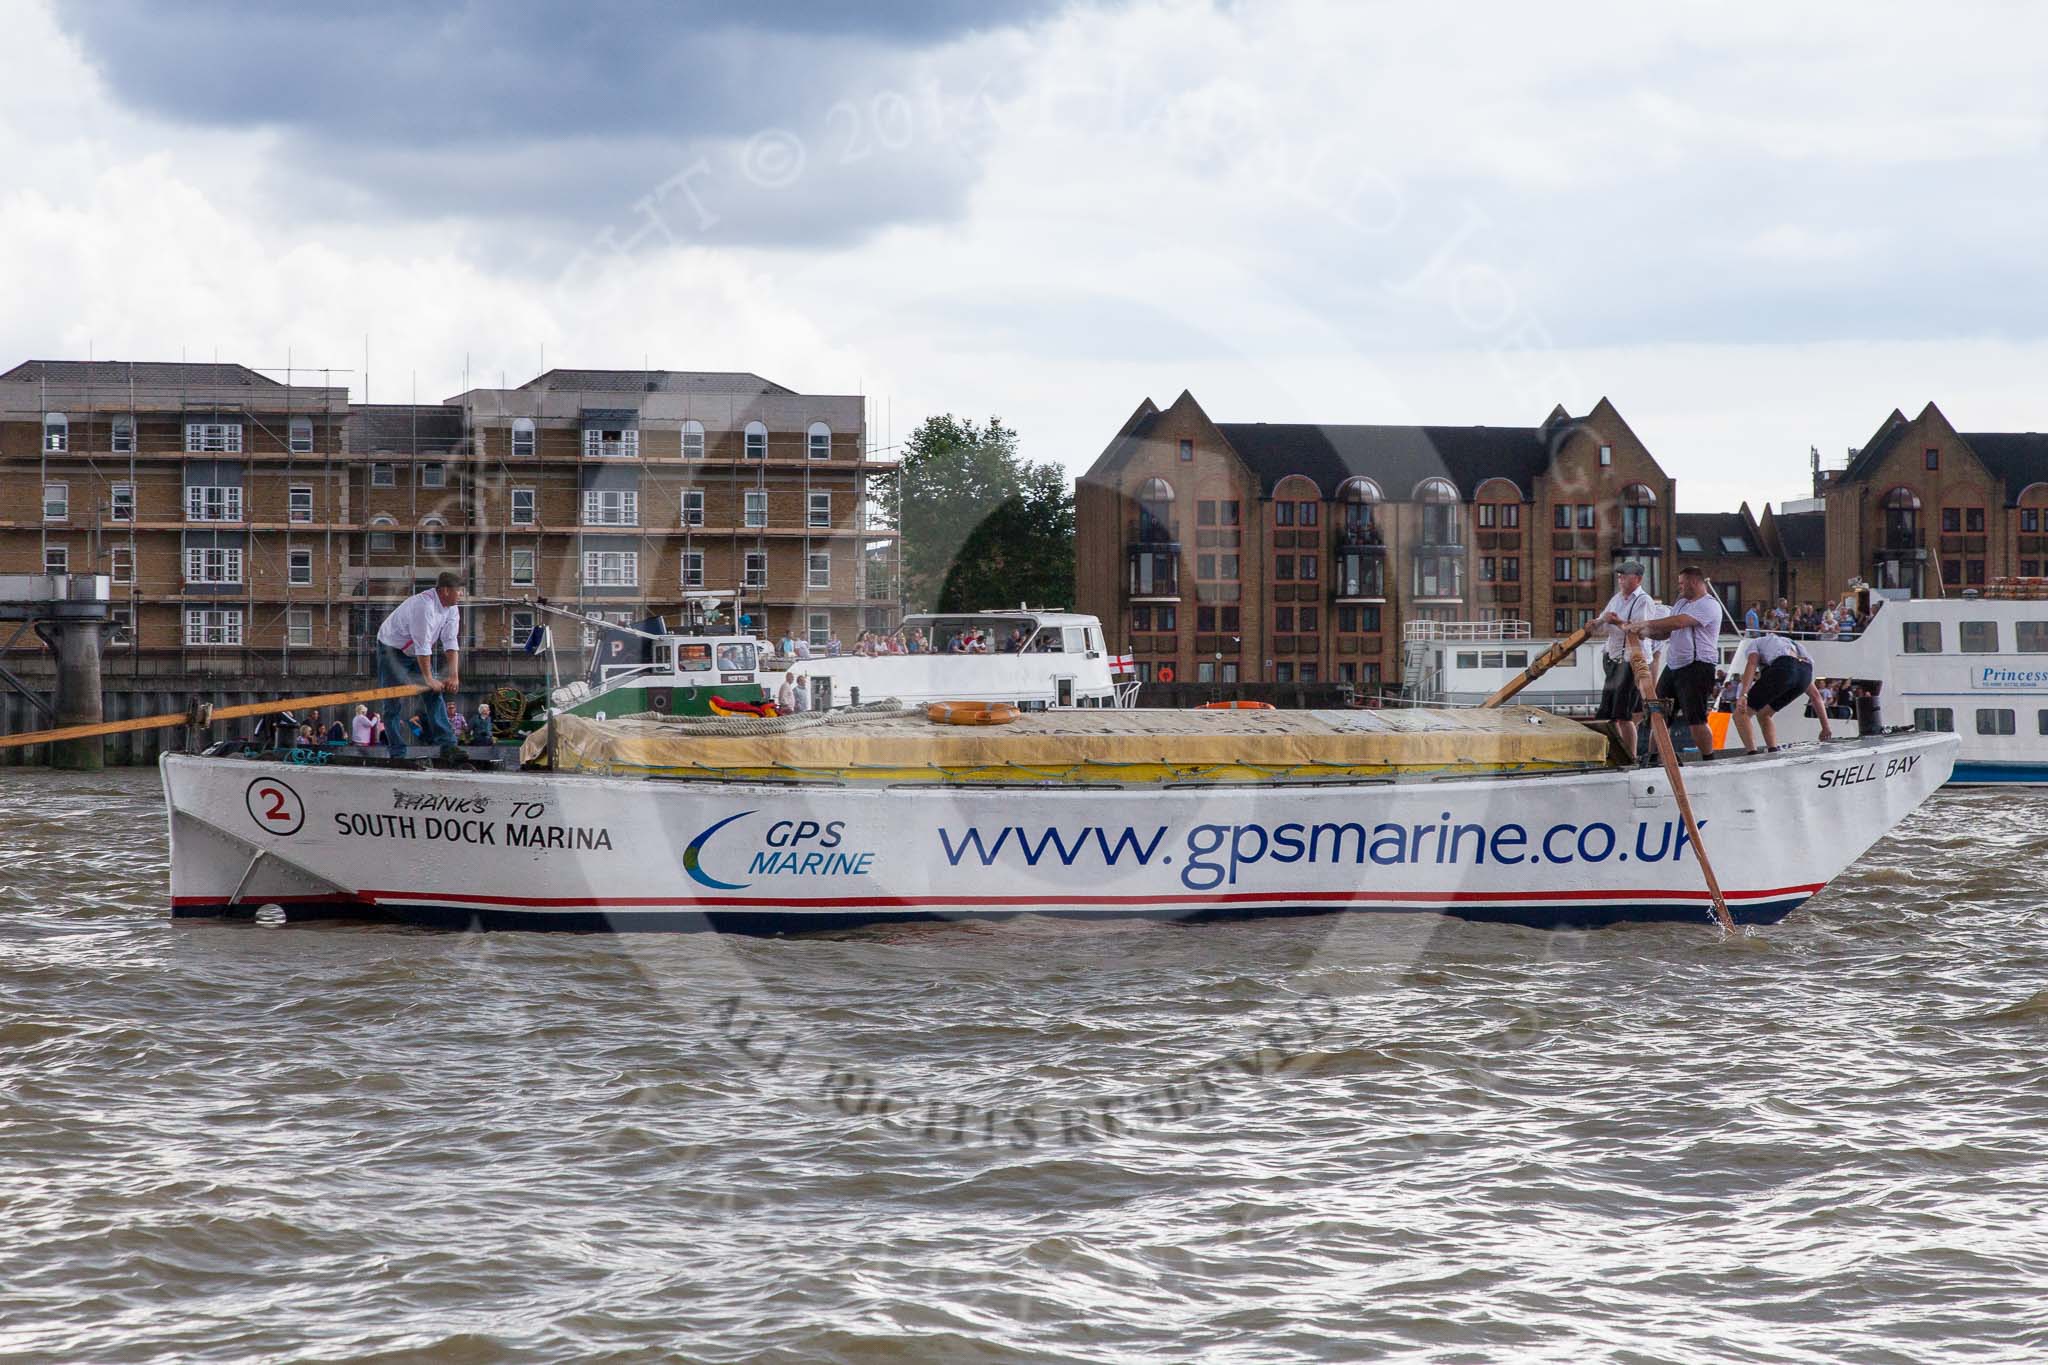 TOW River Thames Barge Driving Race 2014.
River Thames between Greenwich and Westminster,
London,

United Kingdom,
on 28 June 2014 at 13:12, image #205